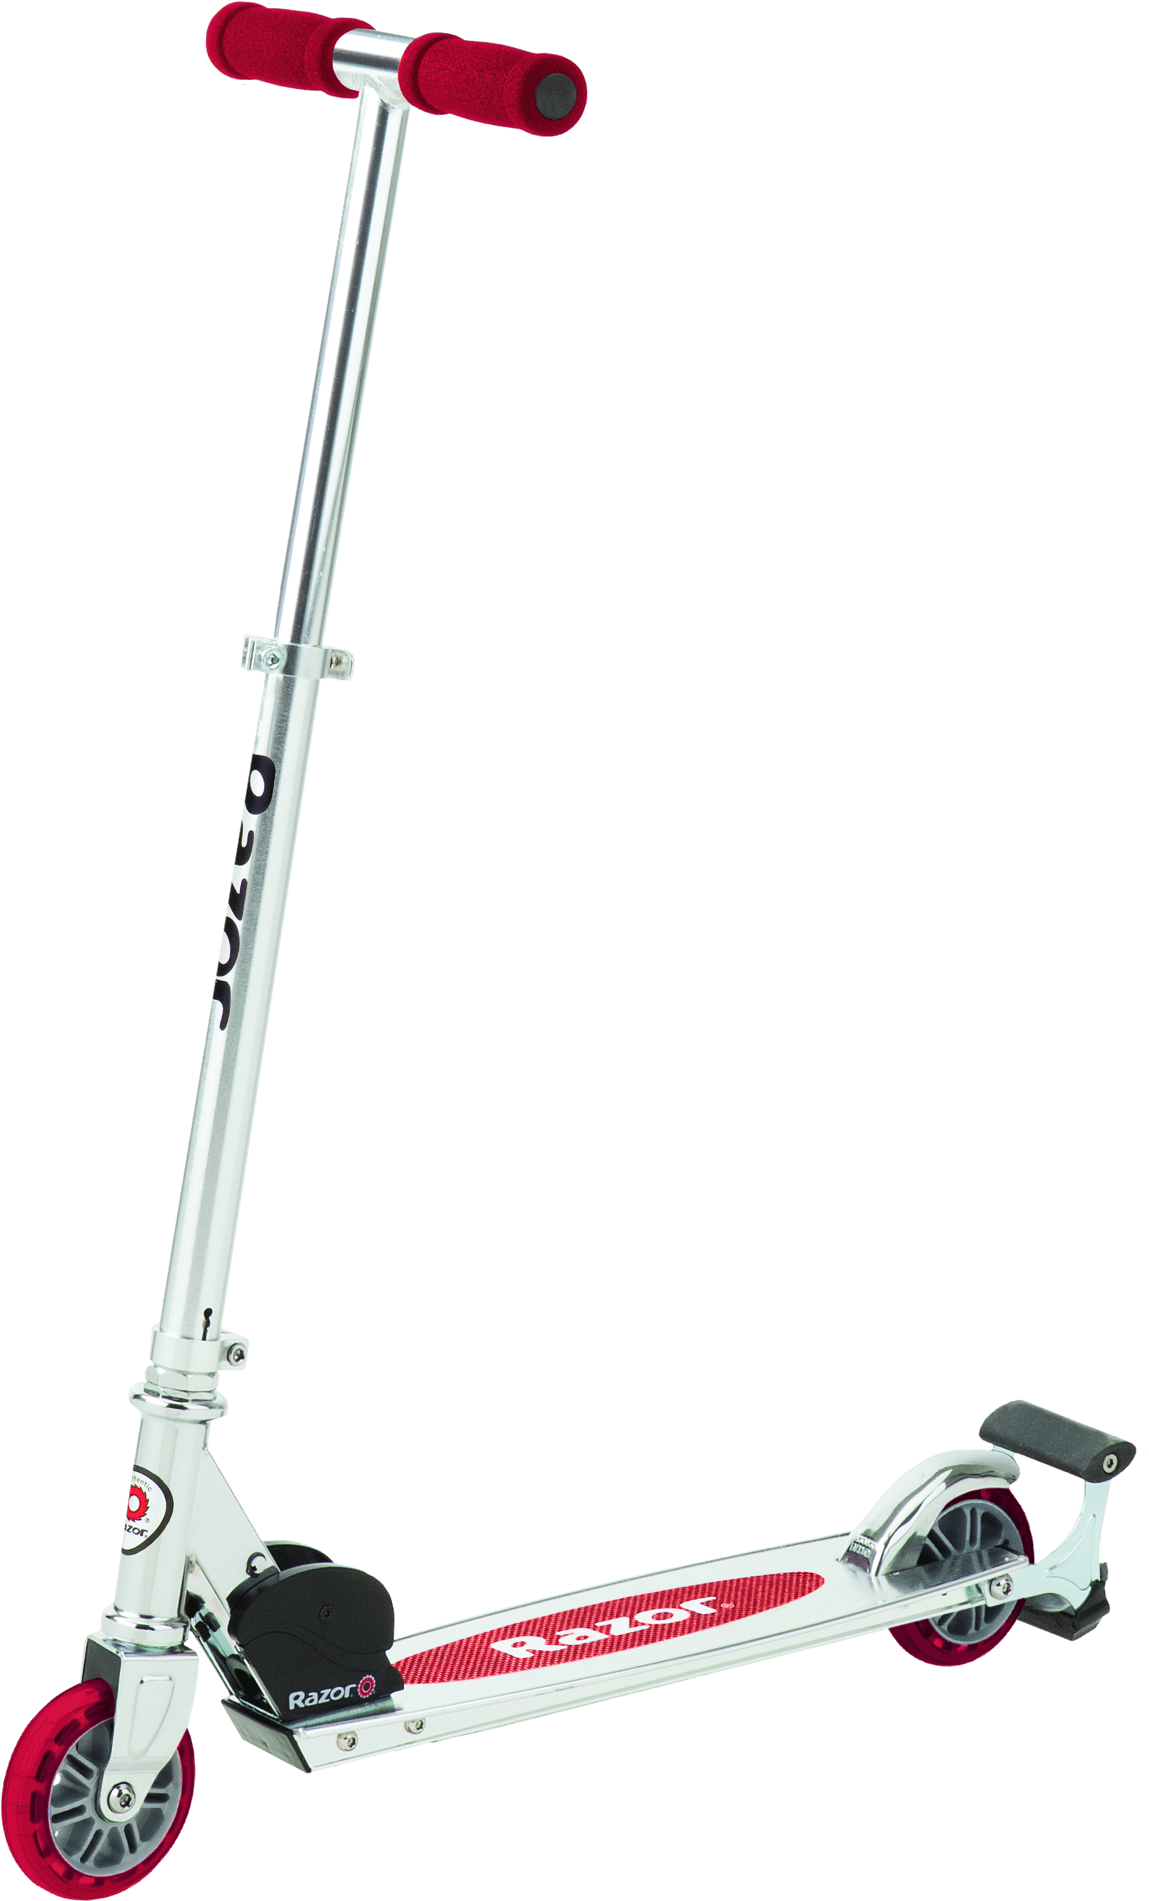 Previous - Razor Spark Scooter (1323x2000), Png Download